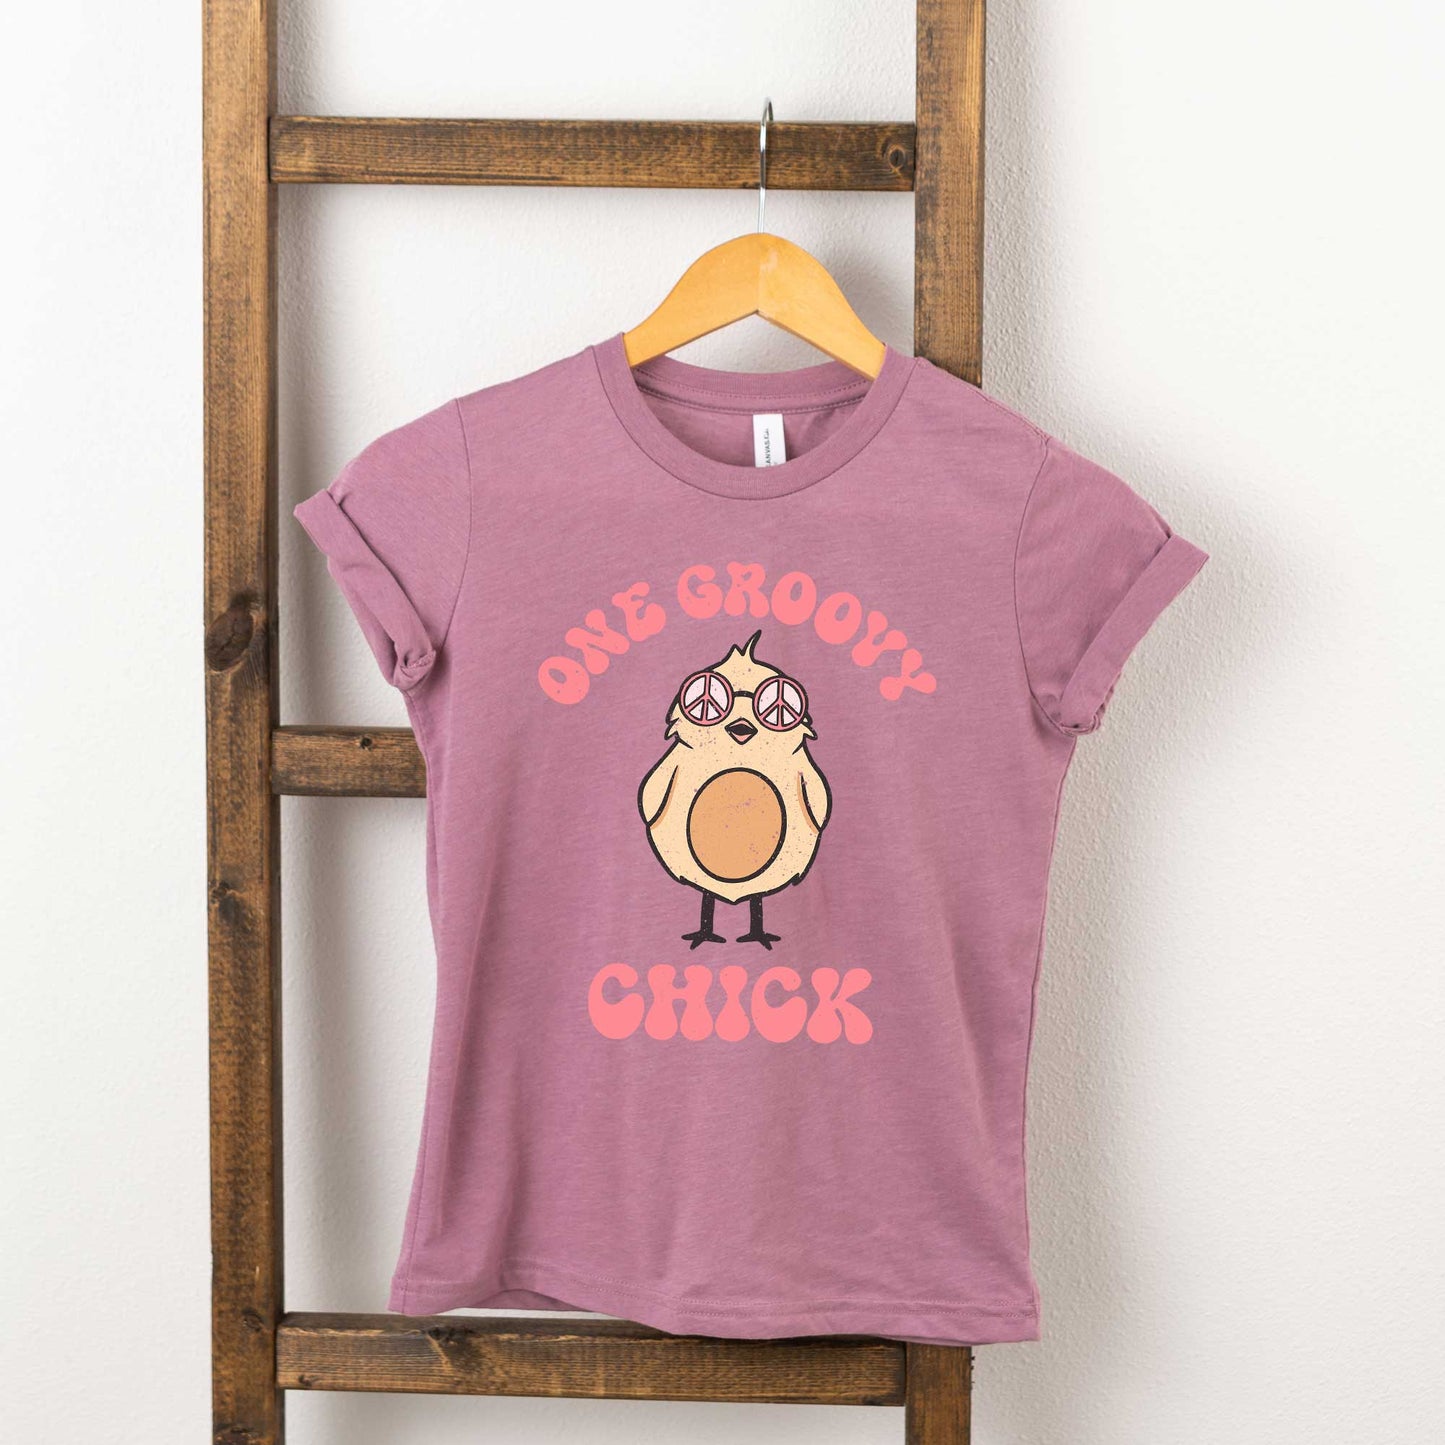 One Groovy Chick | Youth Short Sleeve Crew Neck